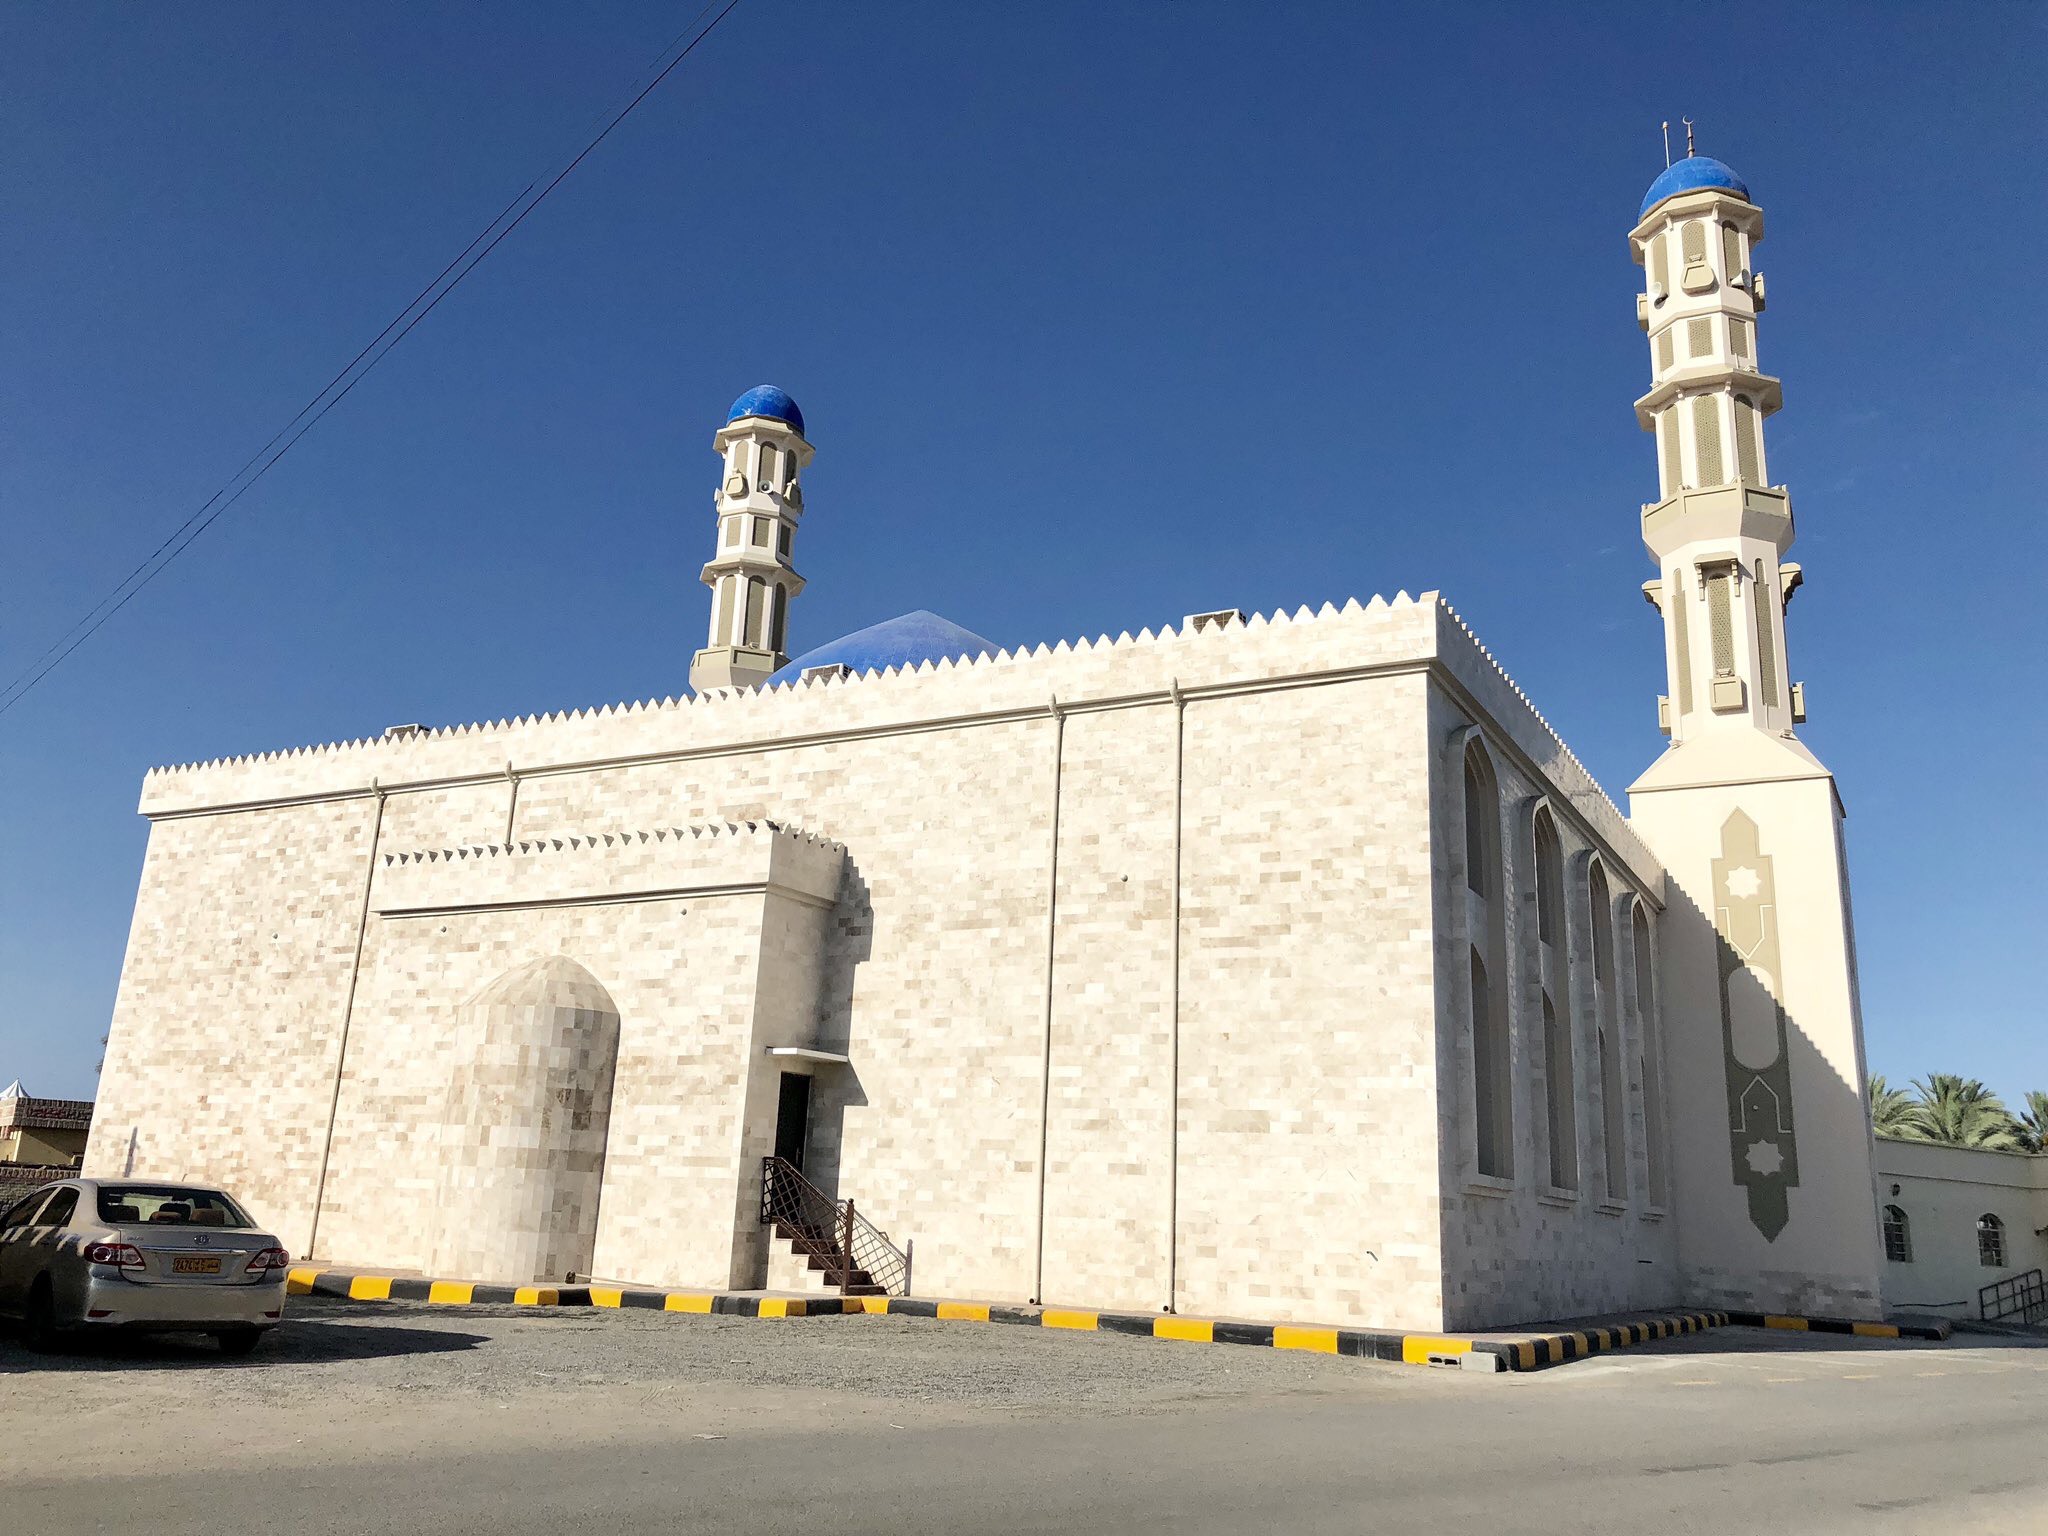 Expat businessman builds a mosque in Oman